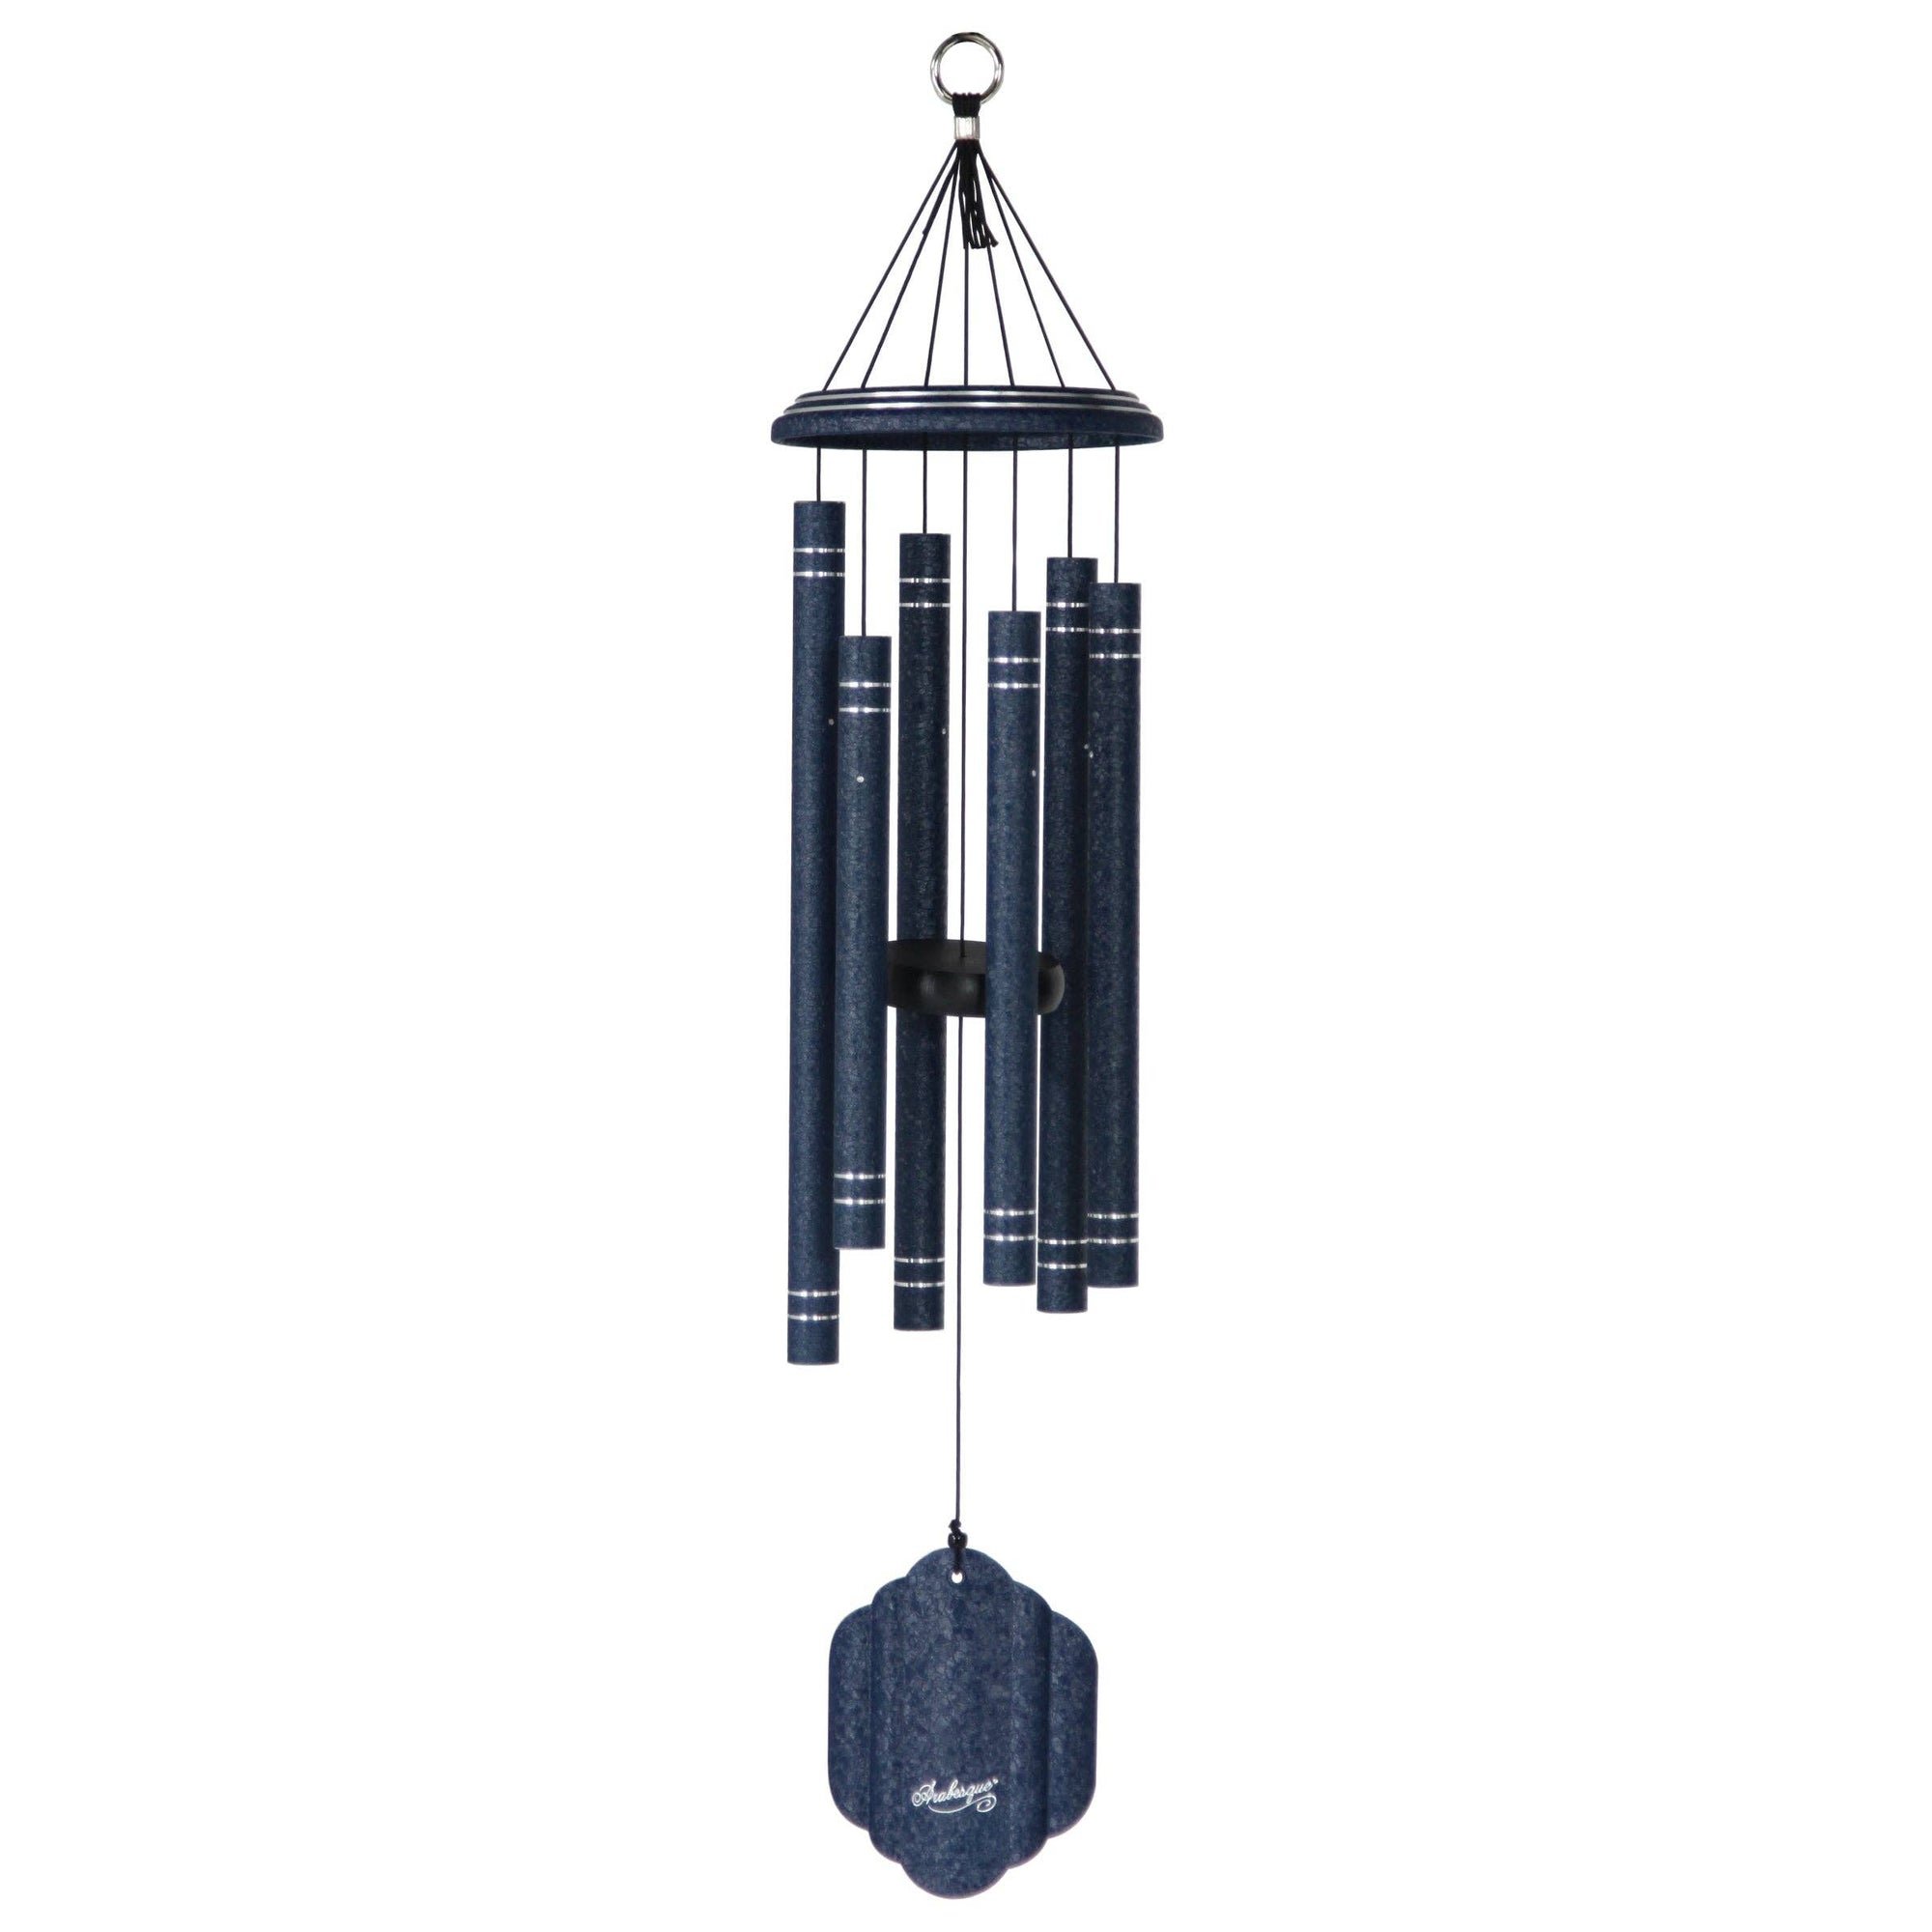 A high-quality 32" Windchime Arabesque® with a blue design hanging on a white background.